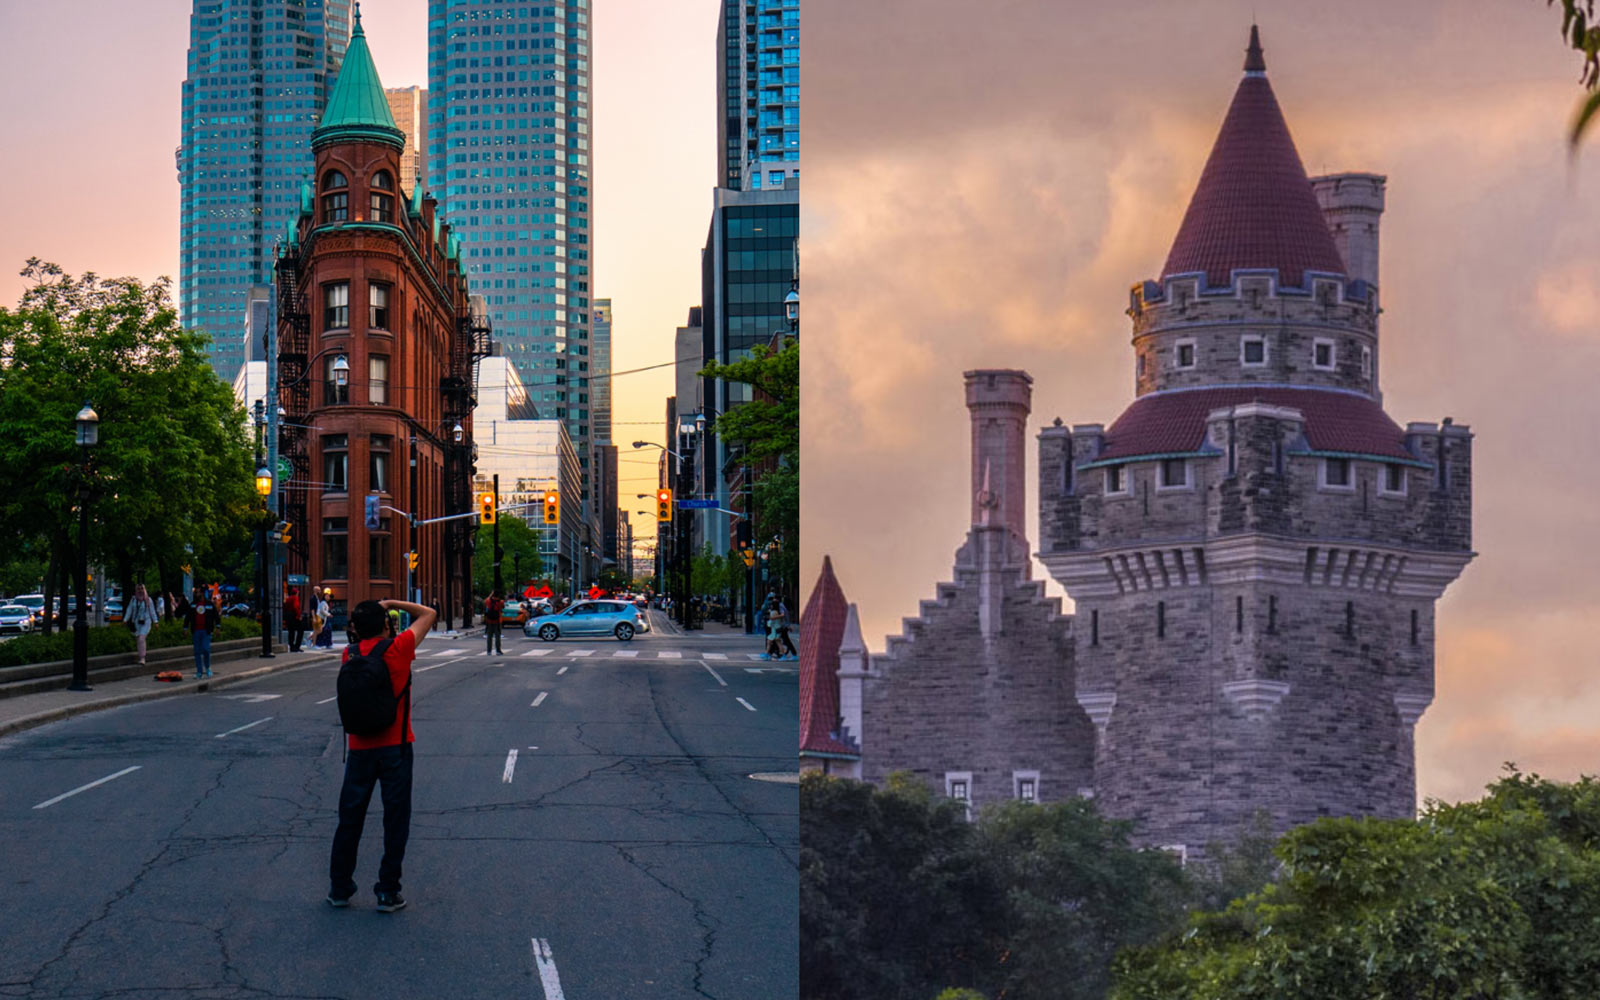 Summer Photo Walks and Guided Tours in Toronto (Events for Photographers and City Explorers)